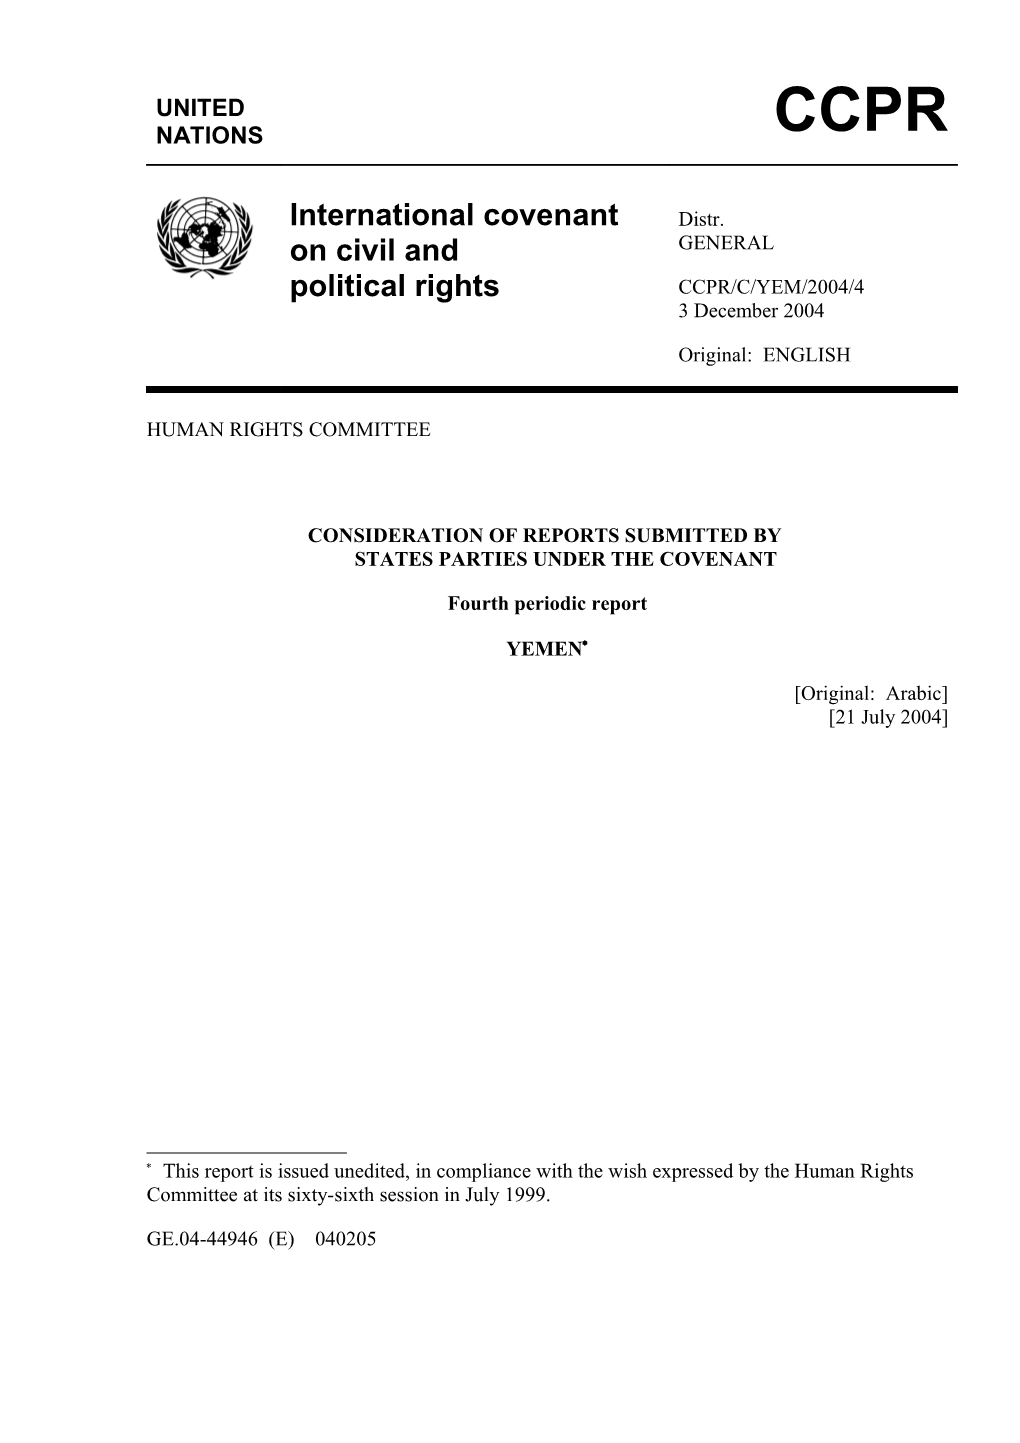 Consideration of Reports Submitted by States Parties Under the Covenant